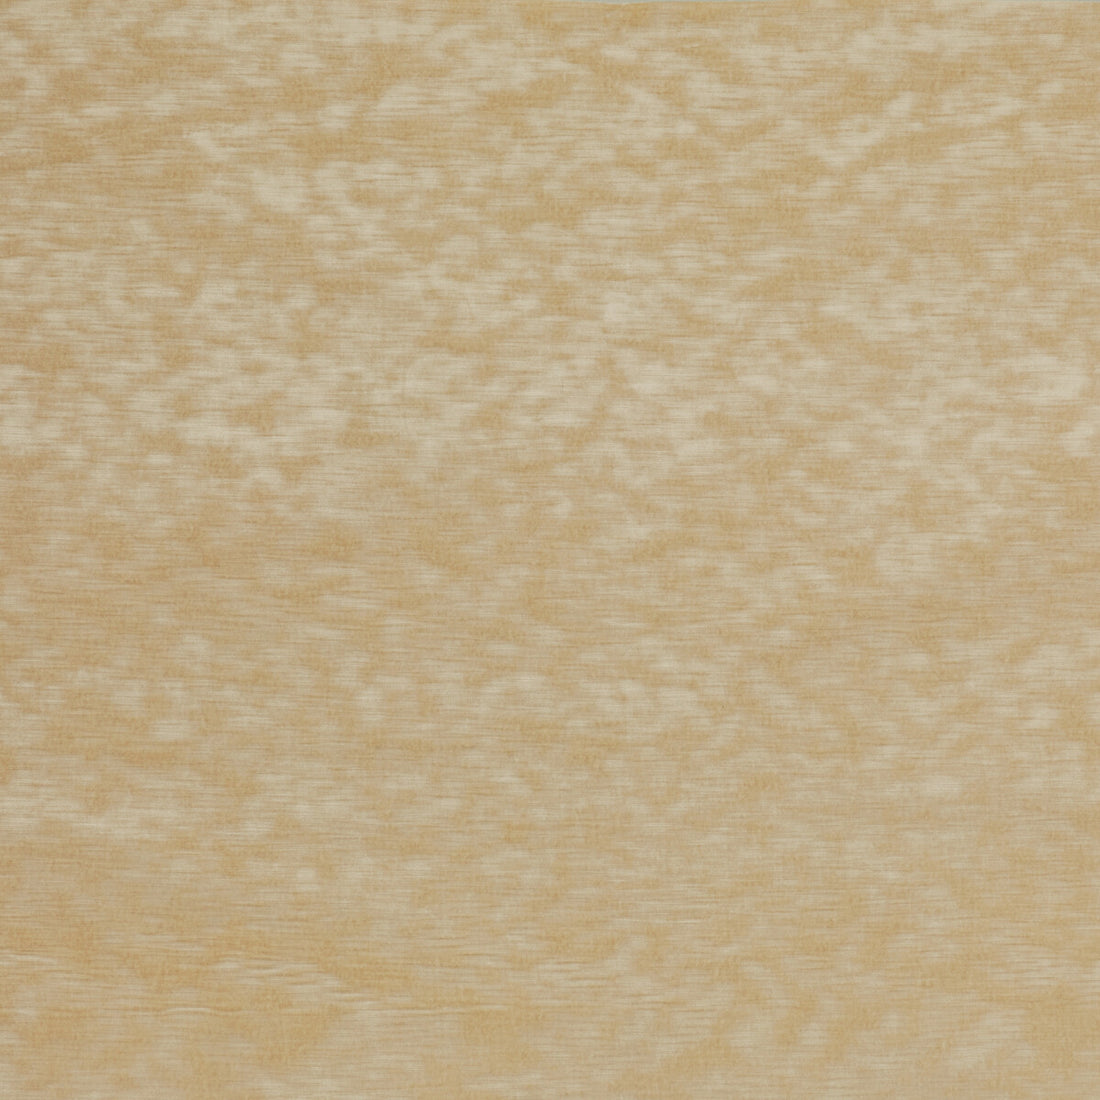 High Impact fabric in ivory color - pattern 34329.116.0 - by Kravet Couture